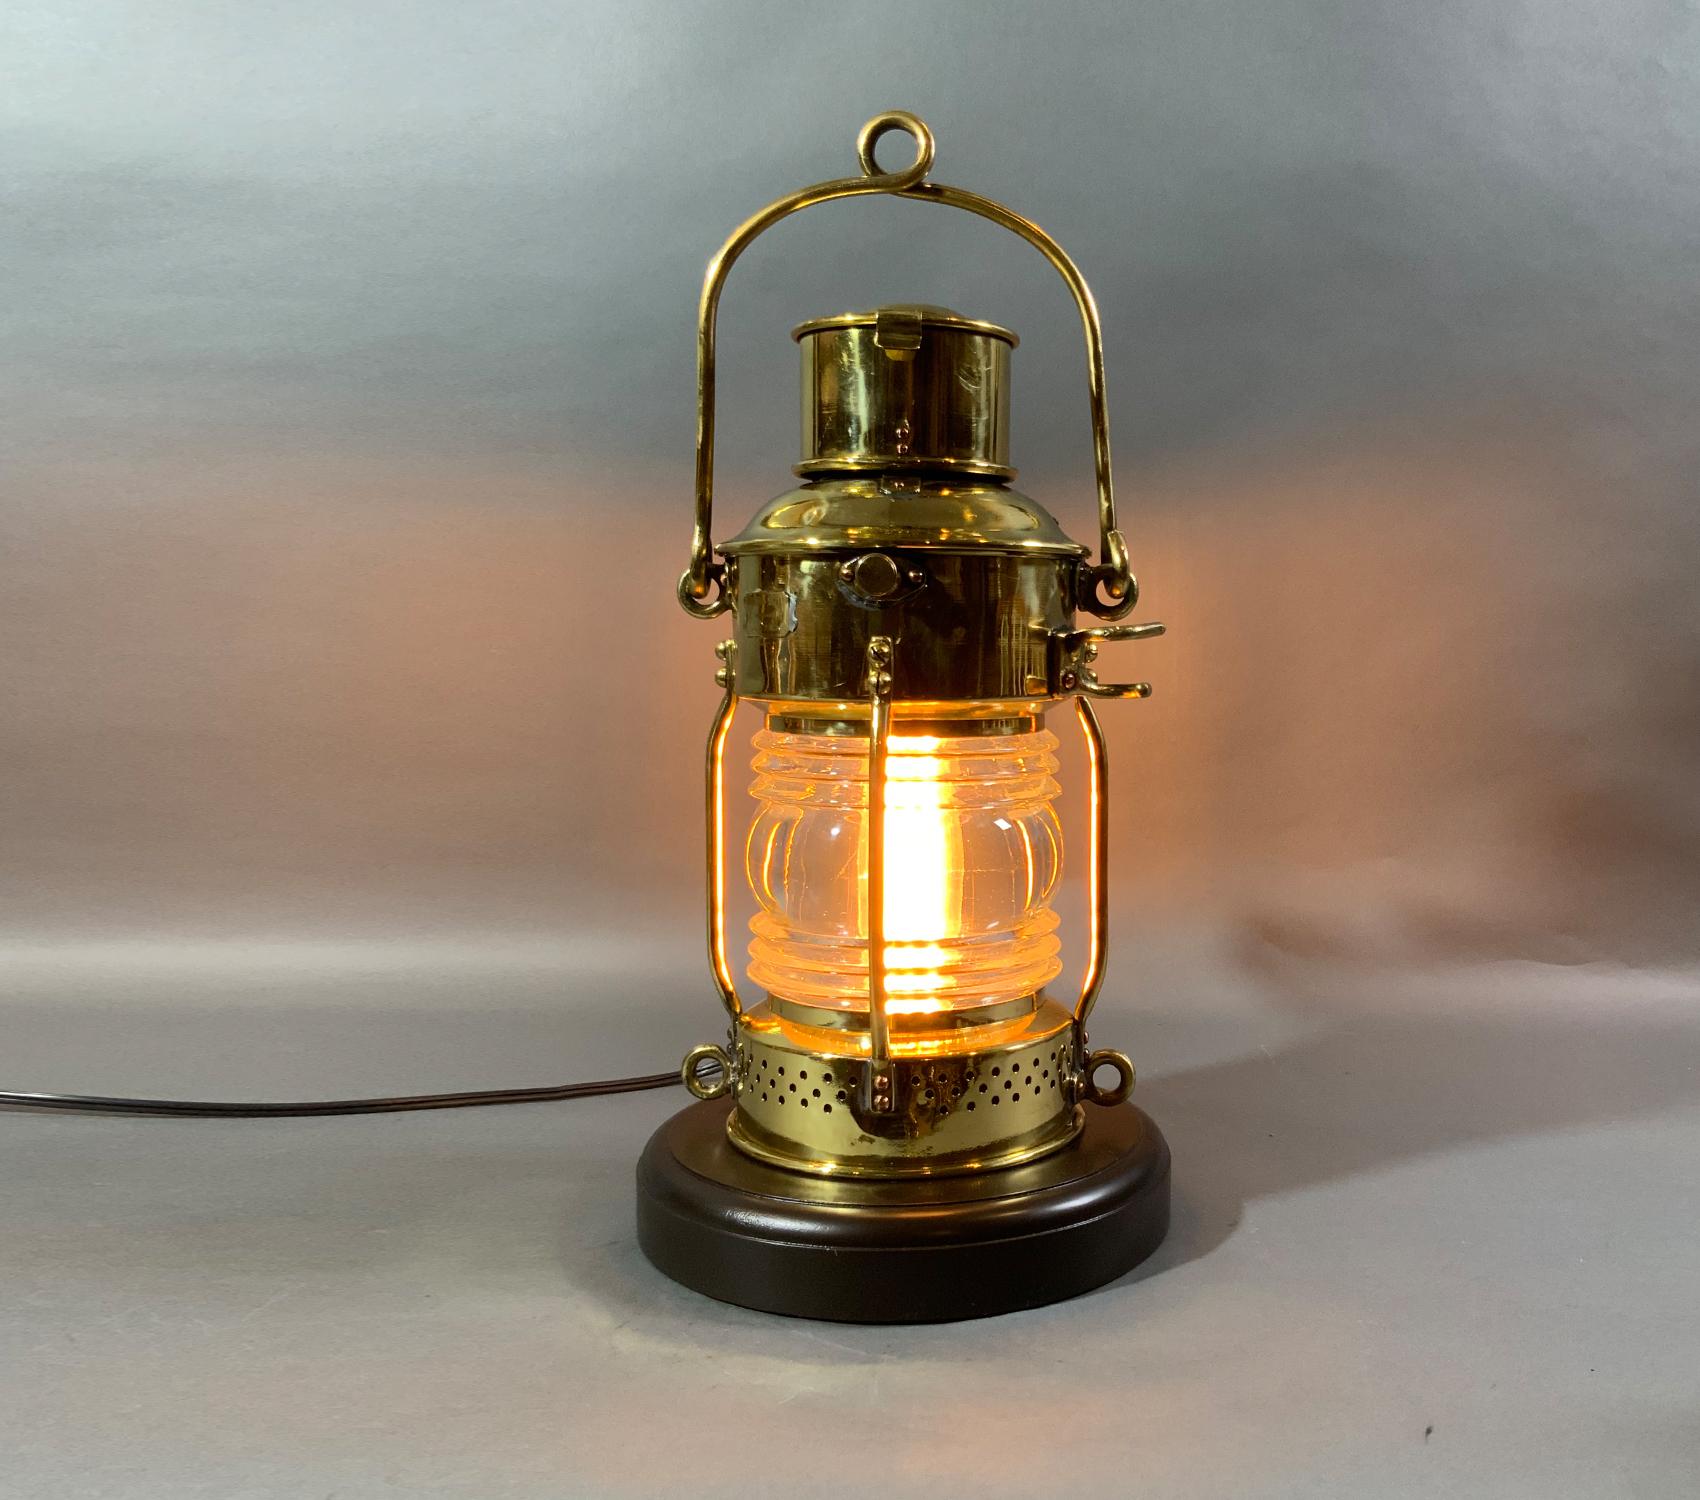 Antique solid brass ships anchor lantern with Fresnel glass lens, hinged top, carry handle, etc. with makers plate from Ouvrard Villars, a highly regarded maker. This is a first-class ship lantern that has been meticulously polished and lacquered.